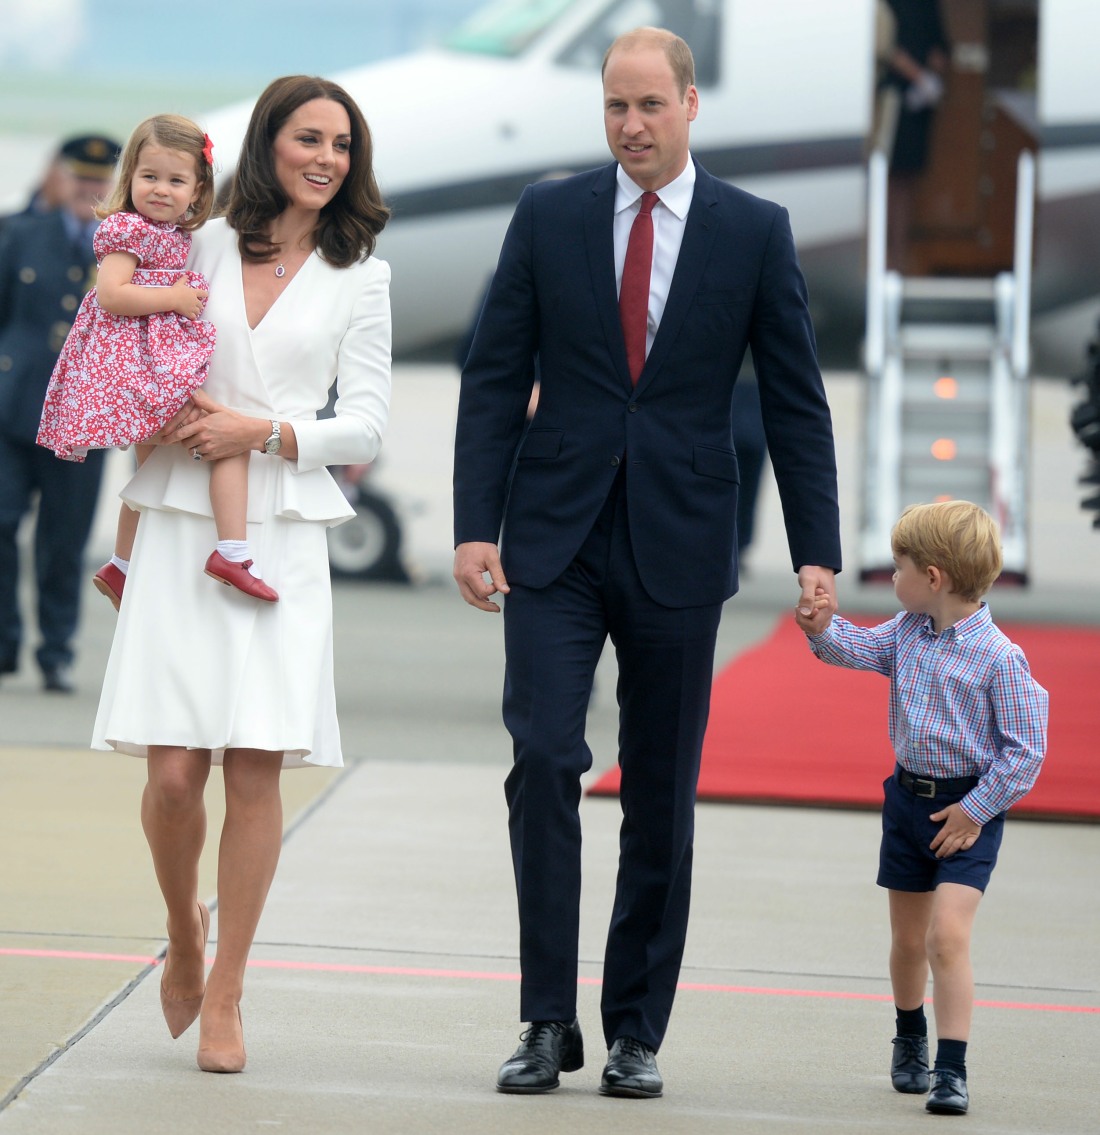 The Duke and Duchess of Cambridge arrive in Poland